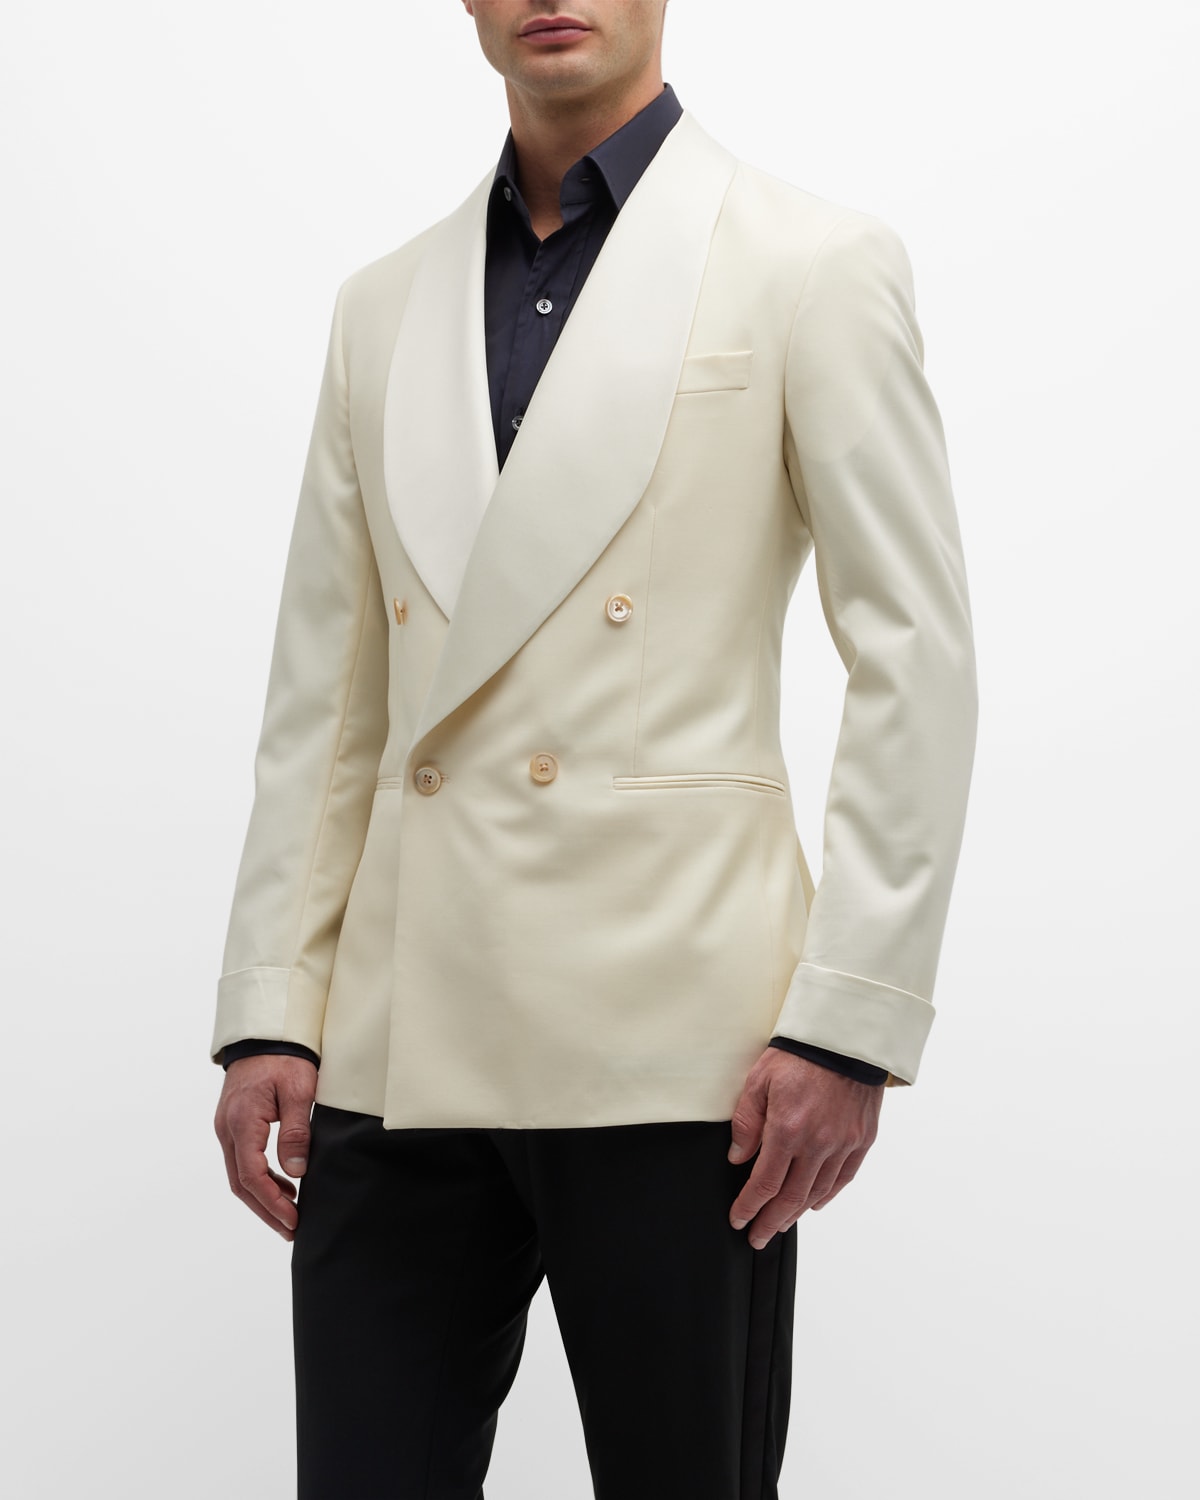 Men's Double-Breasted Shawl Dinner Jacket